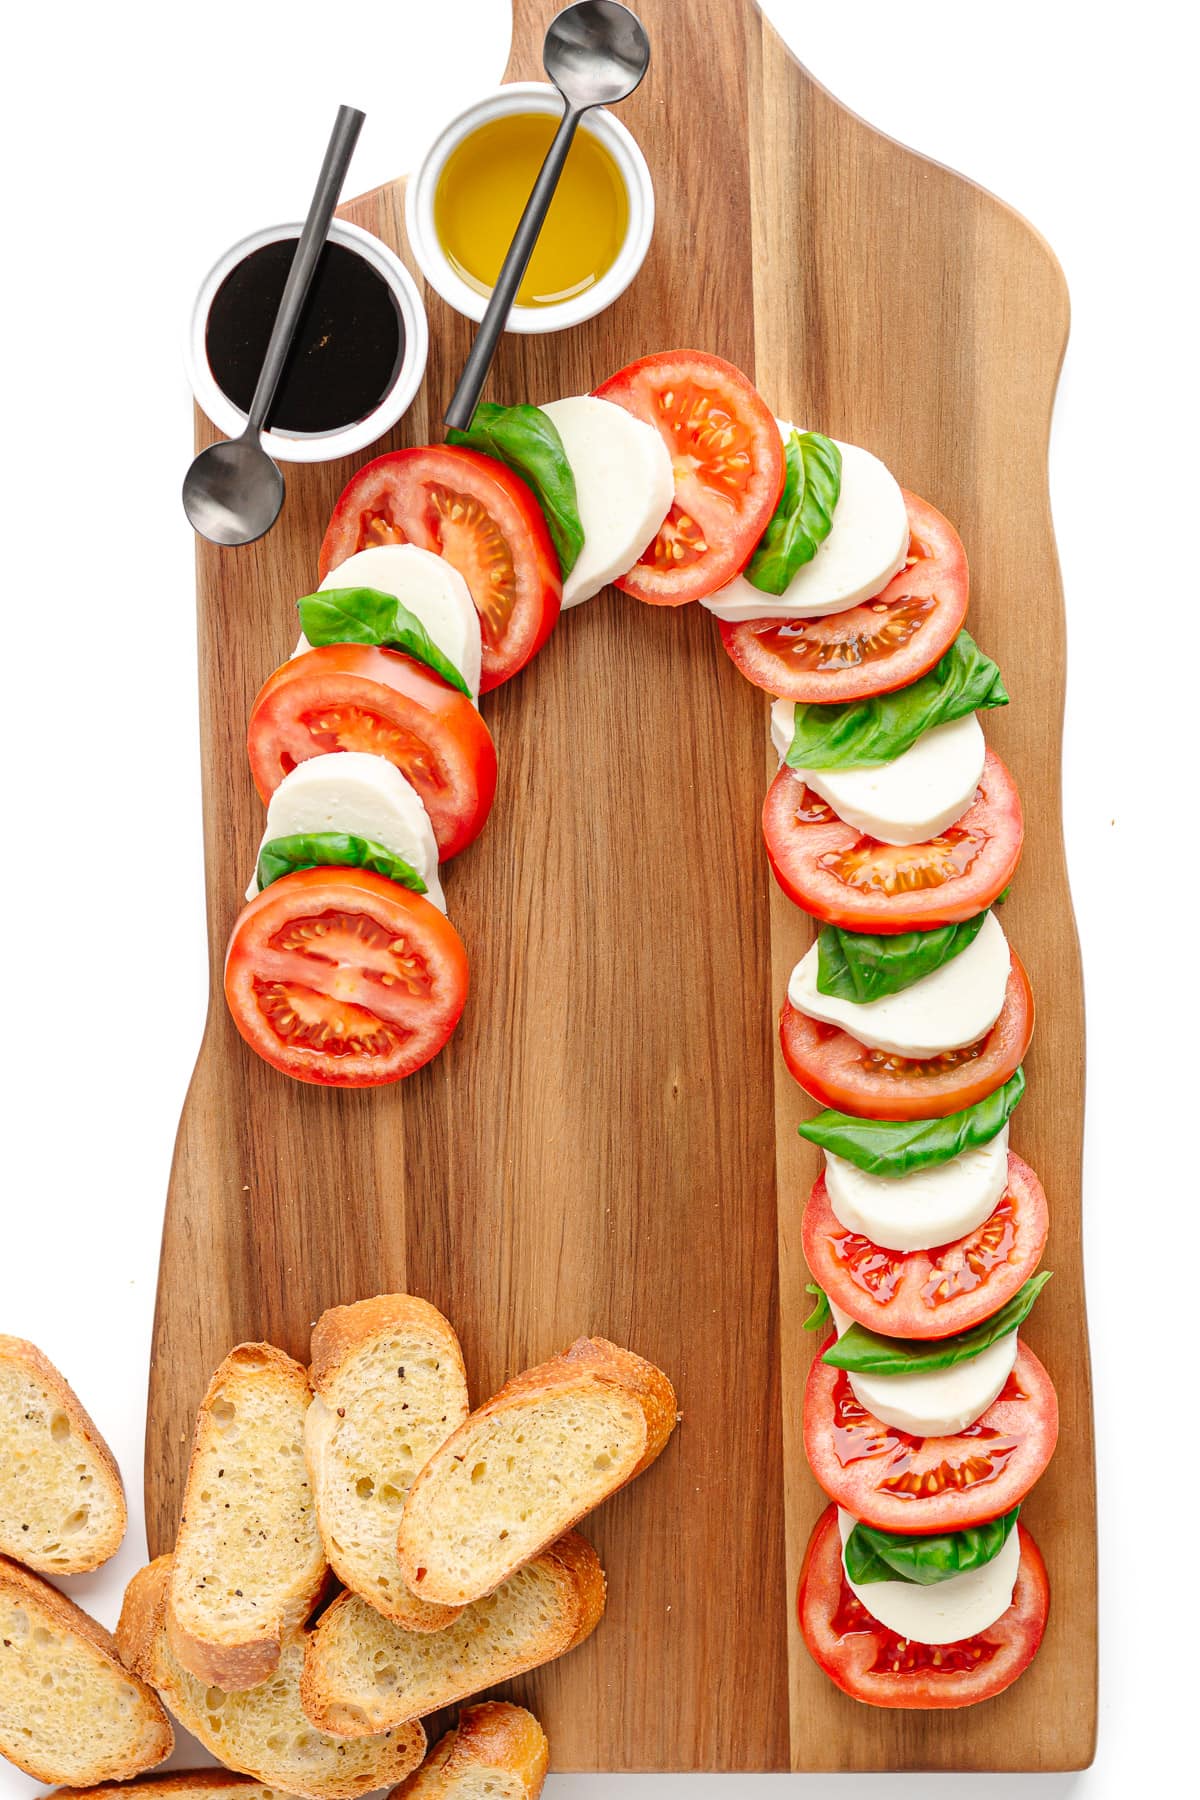 Tomato slices, fresh mozzarella slices and basil leaves arranged into a candy cane shape on a wooden board along with crostini and two small bowls containing balsamic glaze and olive oil.